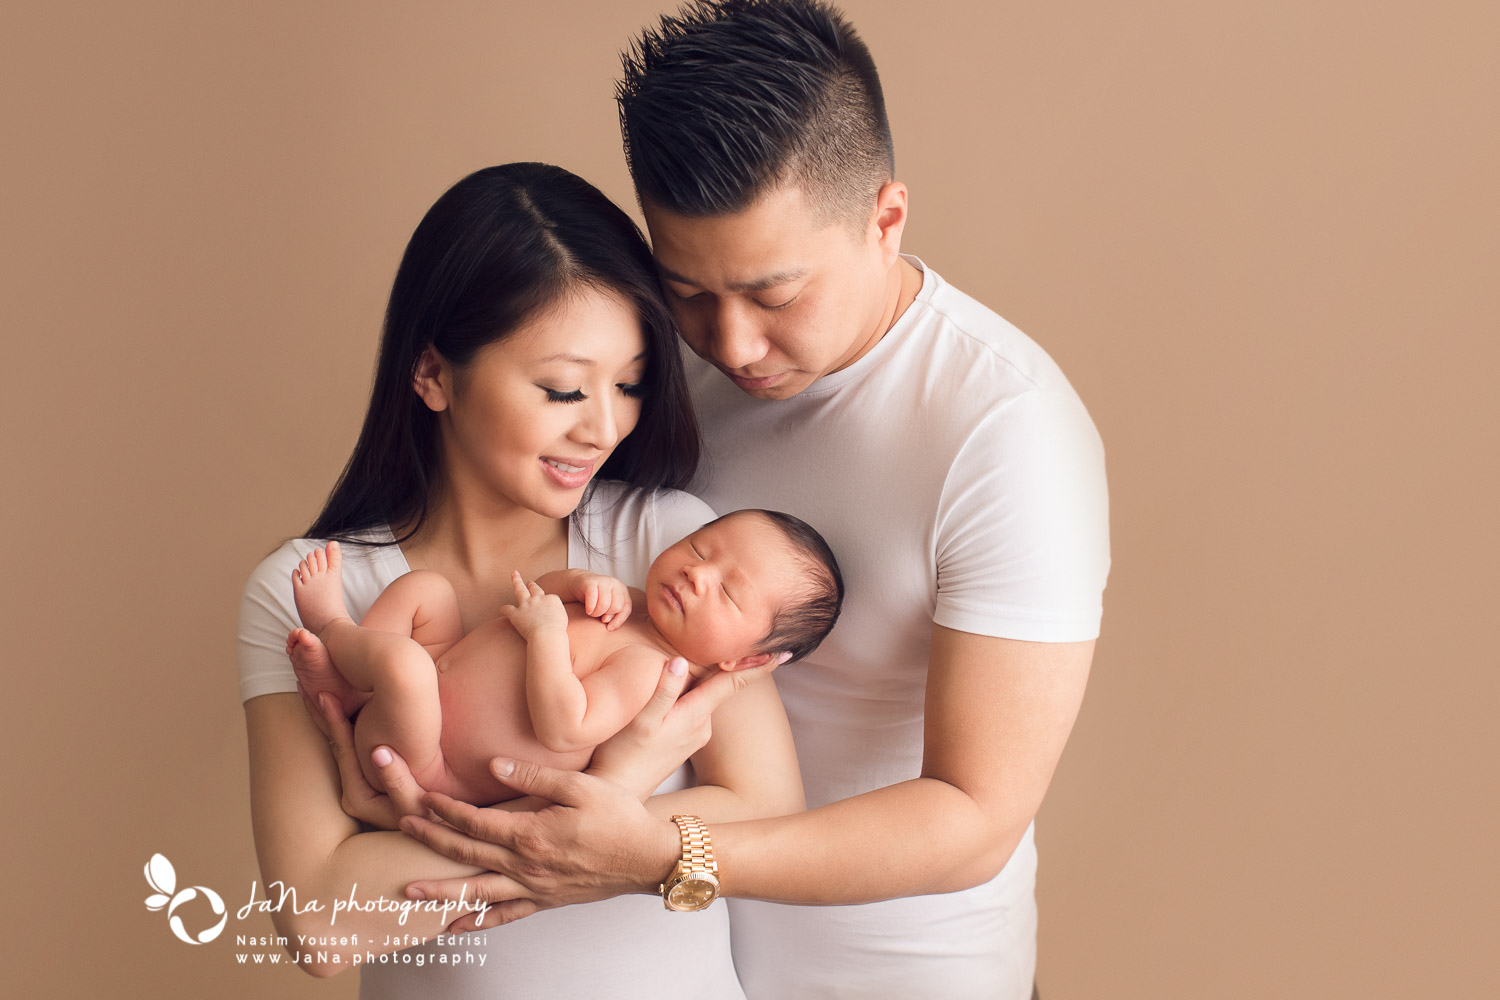 Newborn photography Vancouver - family